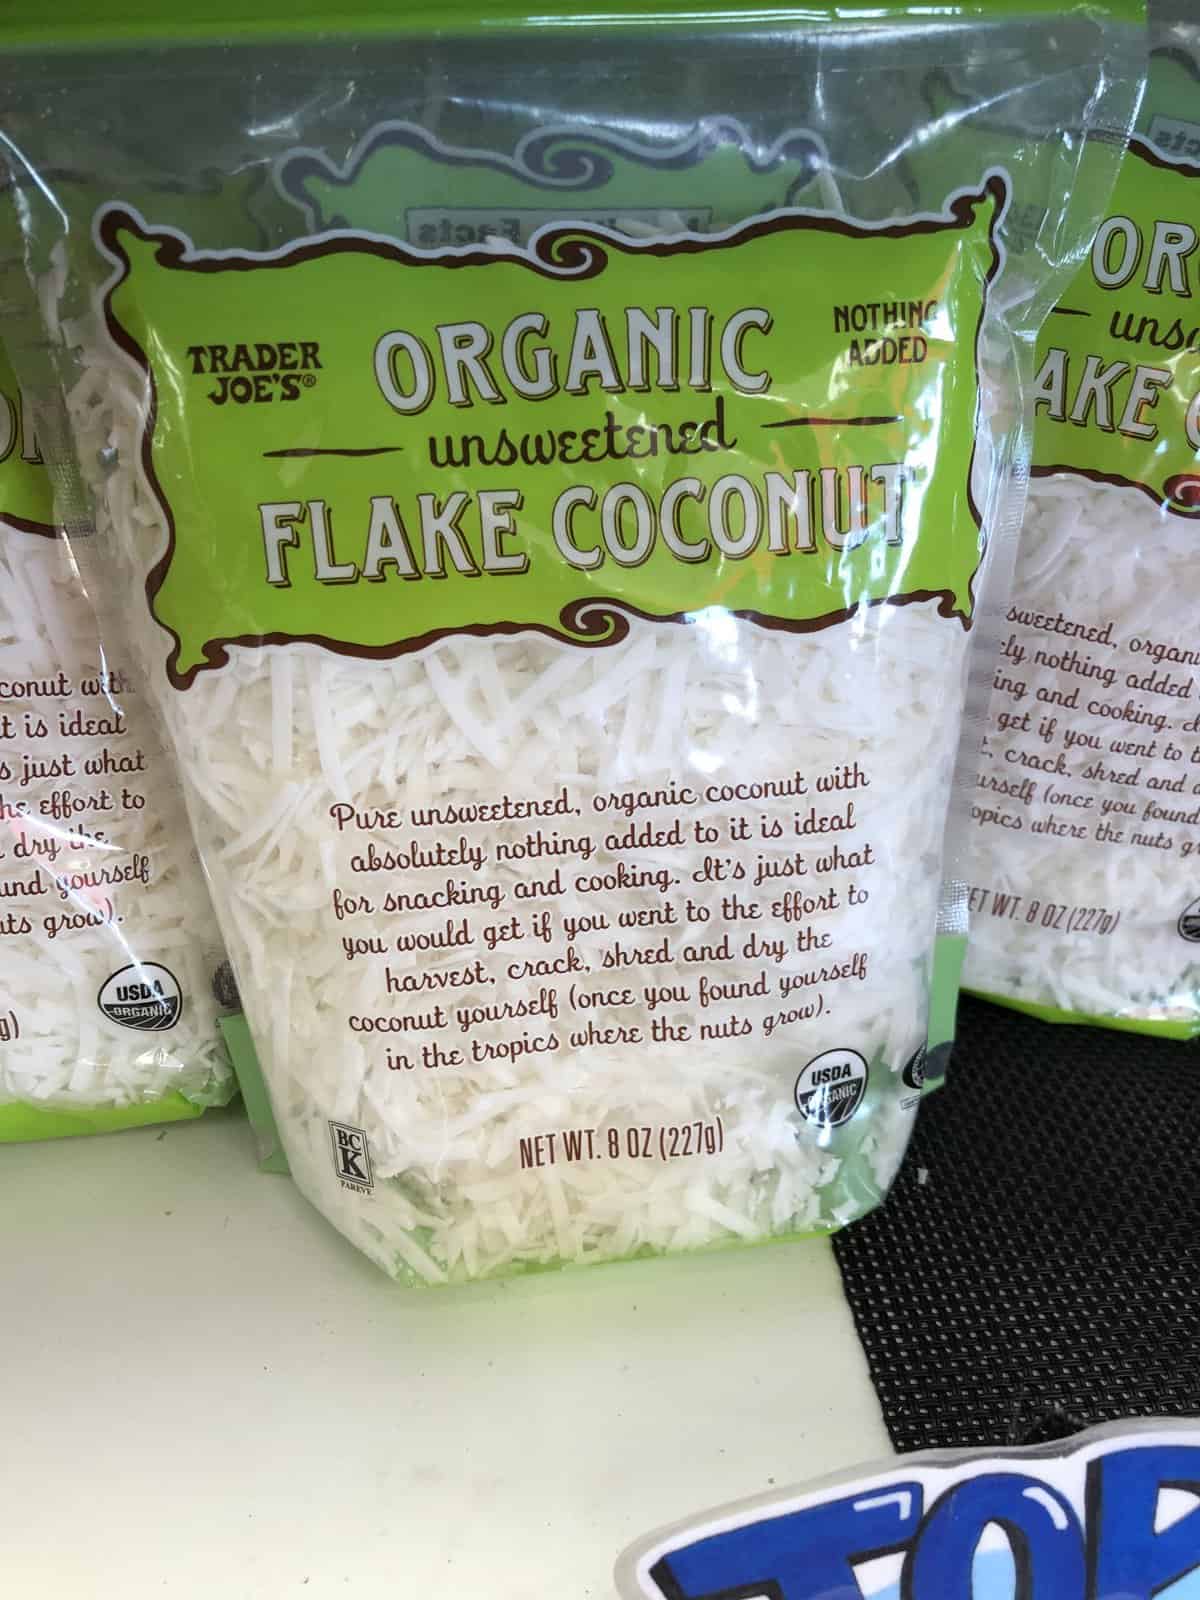 Unsweetened Coconut Flakes The Best Keto Products at Trader Joe's